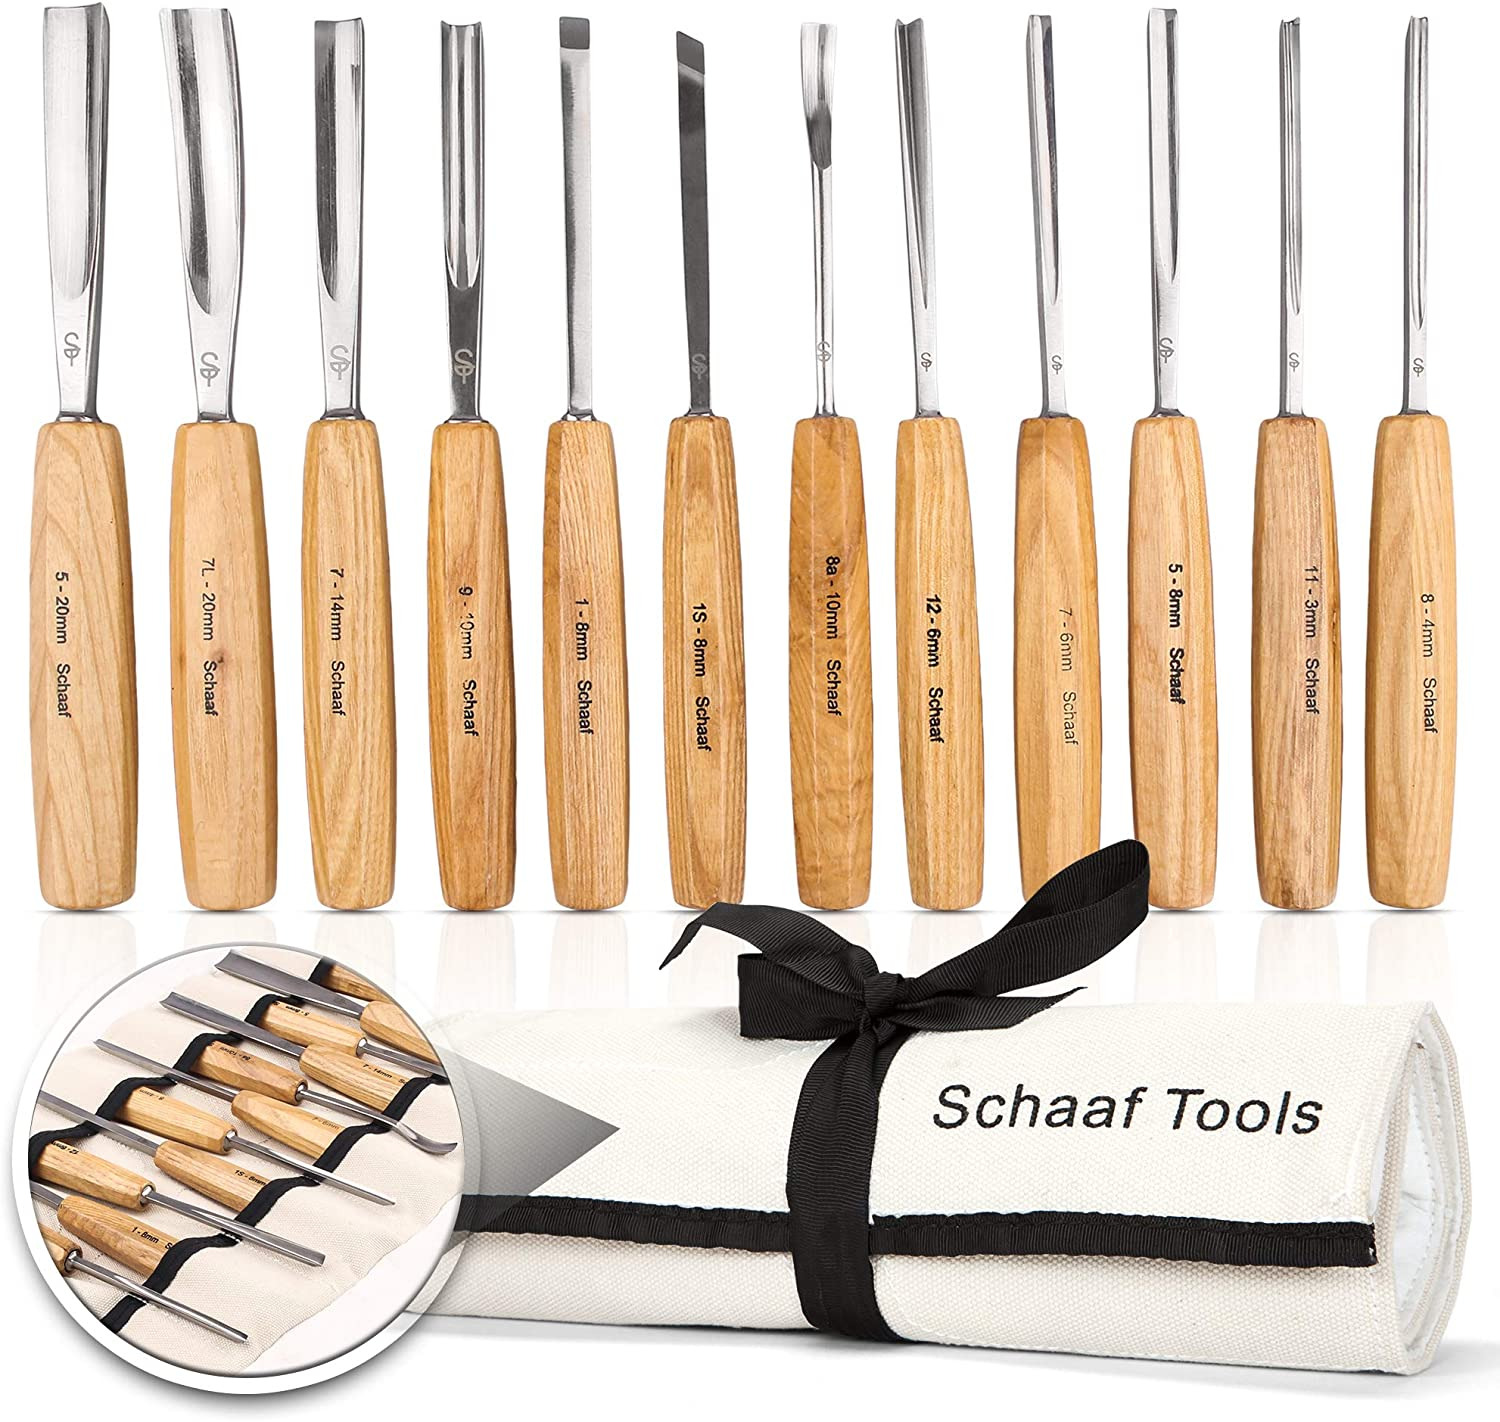 Schaaf Wood Carving Tools Set of 12 Chisels with Canvas Case 